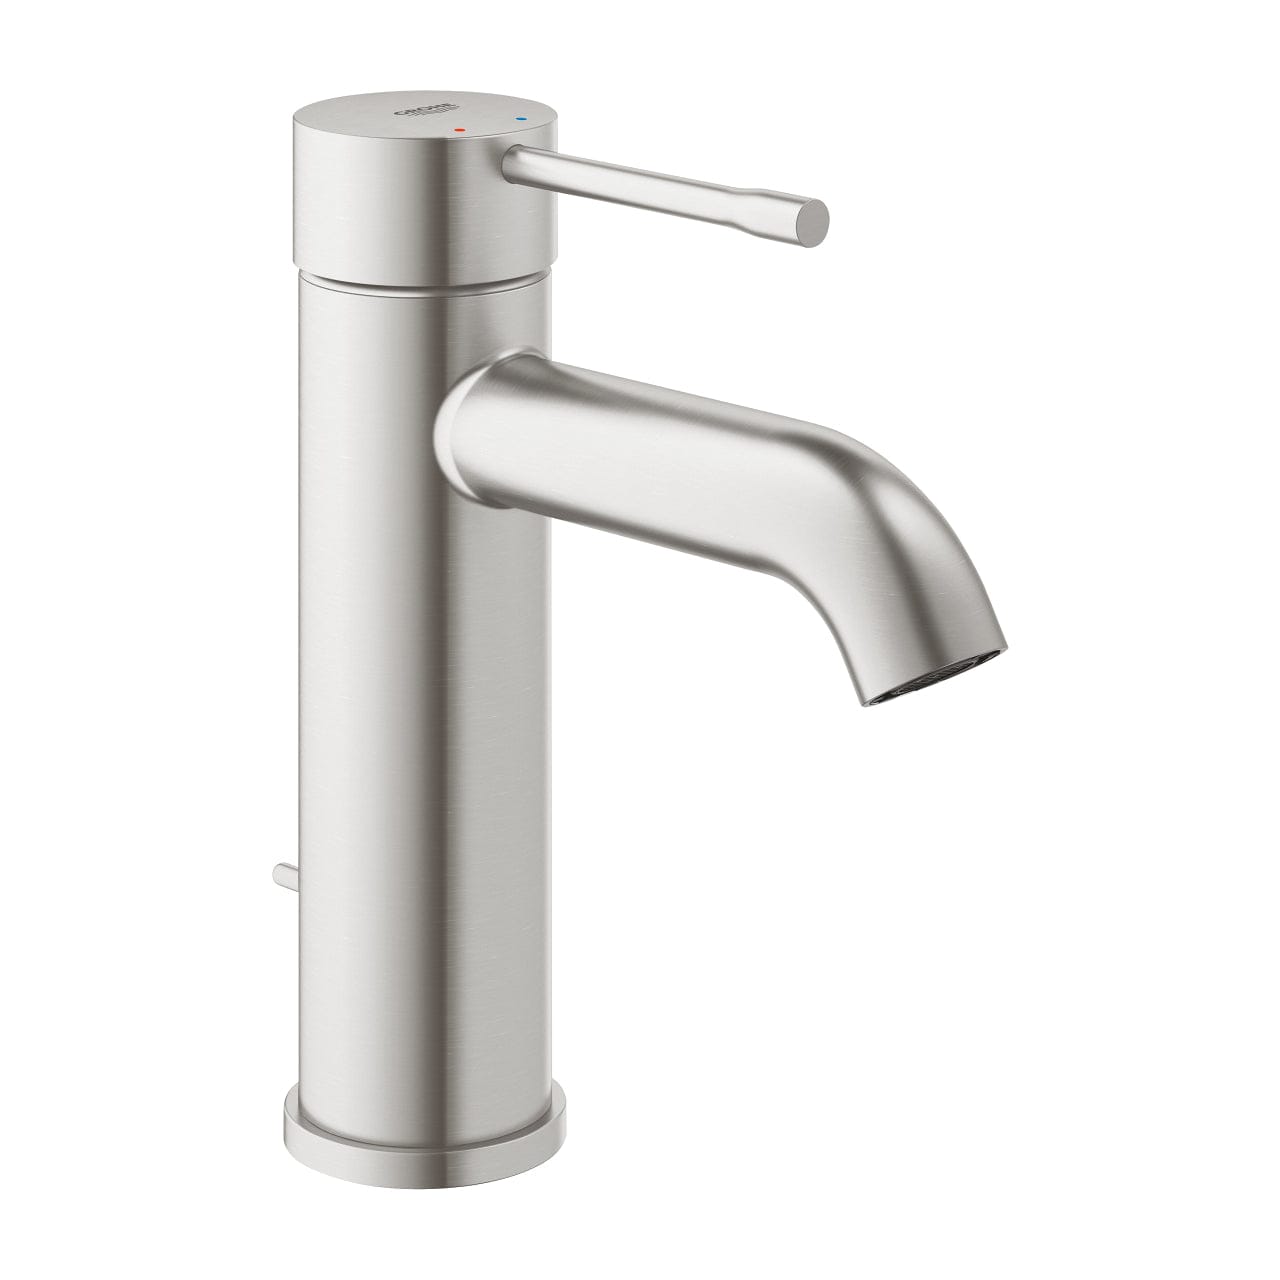 Grohe Essence Basin Mixer 1/2″ S-Size, Supersteel | Supply Master | Accra, Ghana Bathroom Faucet Buy Tools hardware Building materials